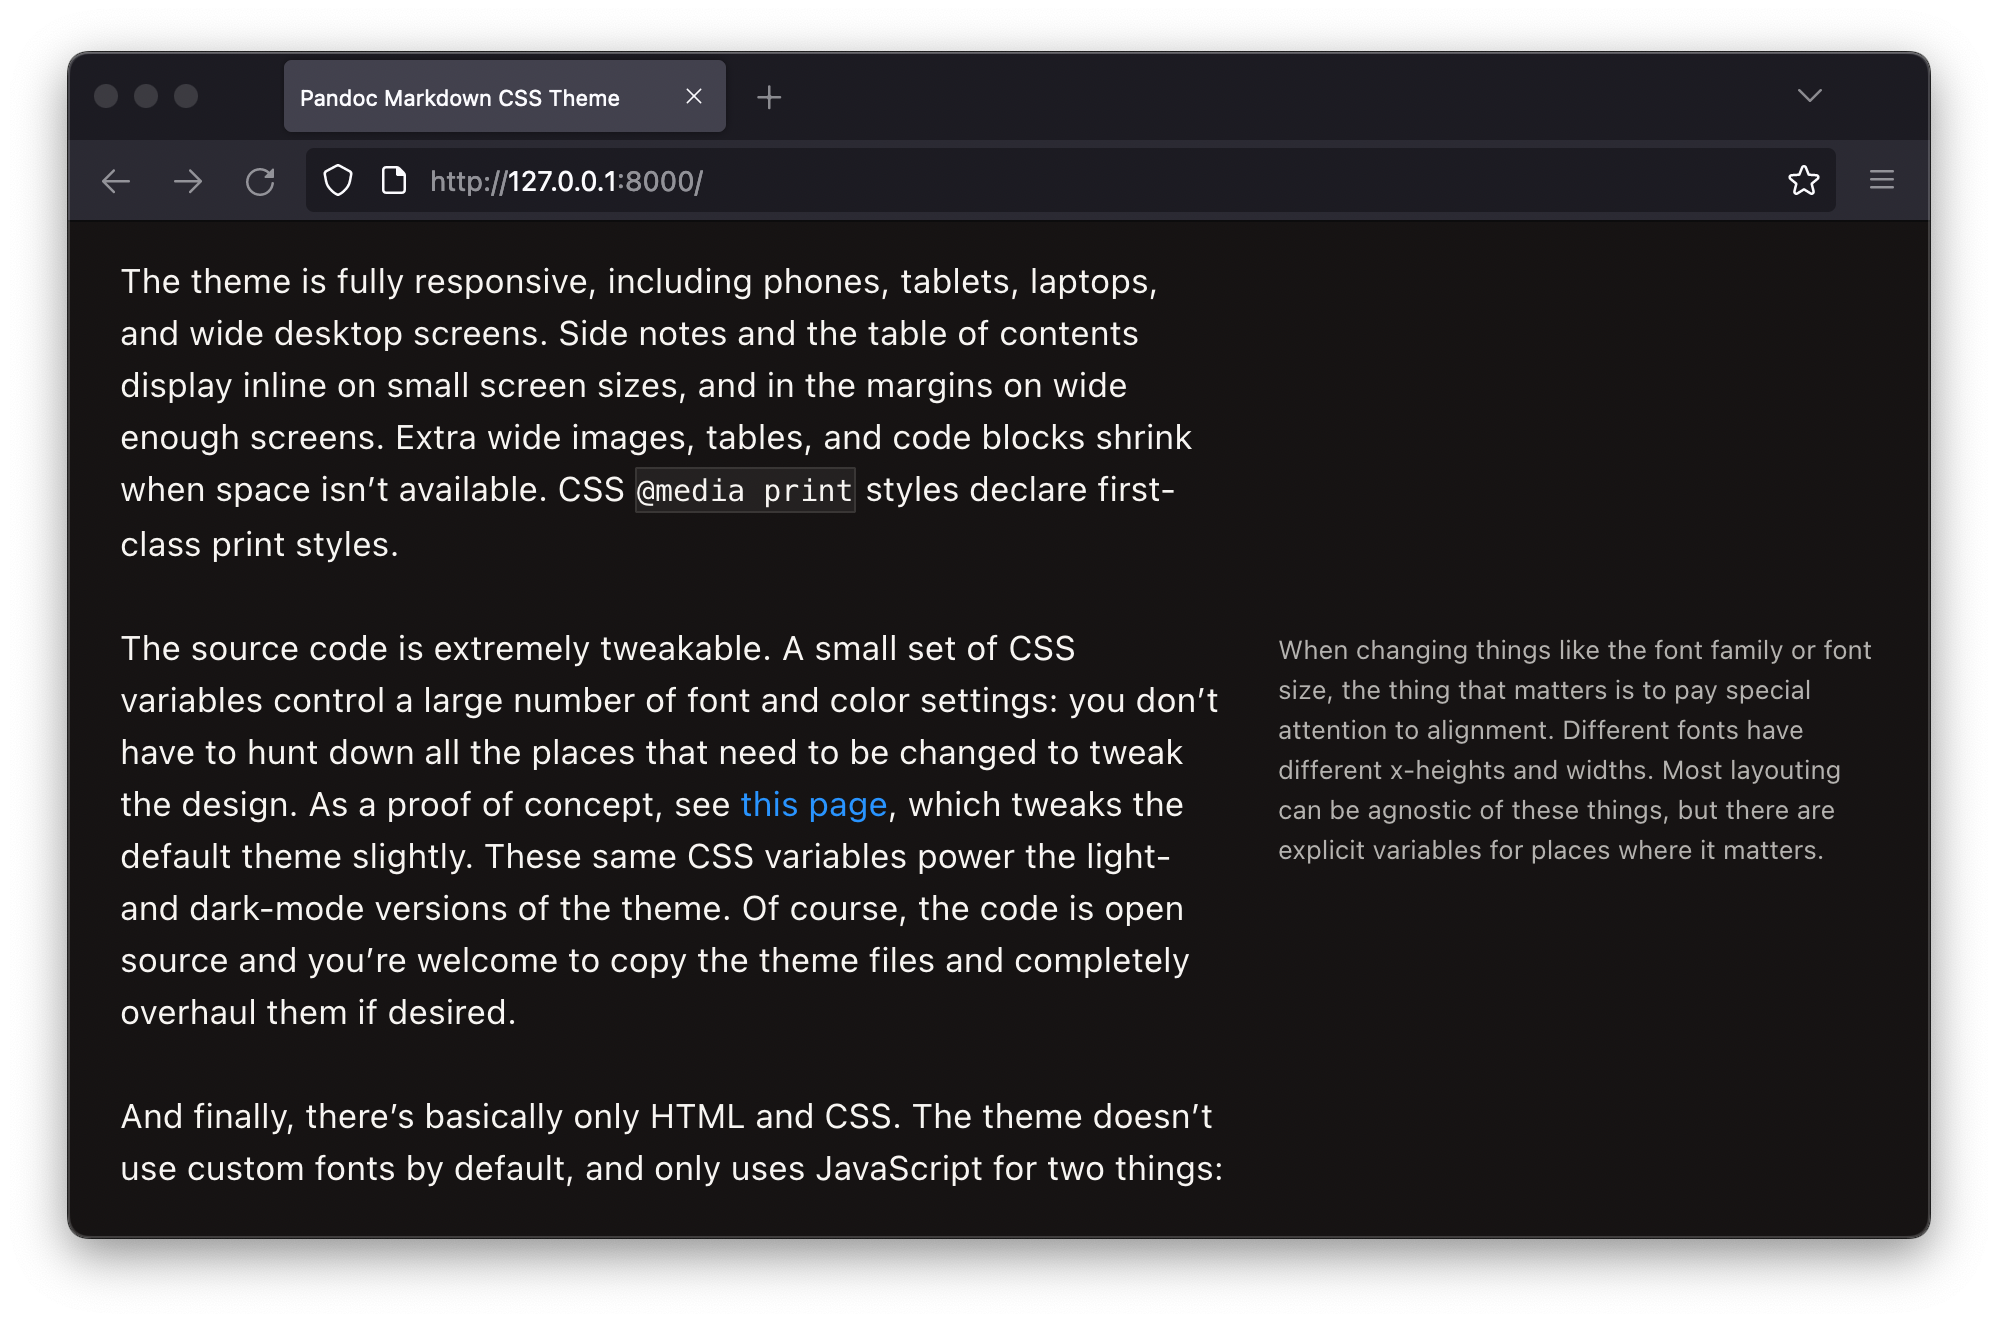 The dark-mode version of the image